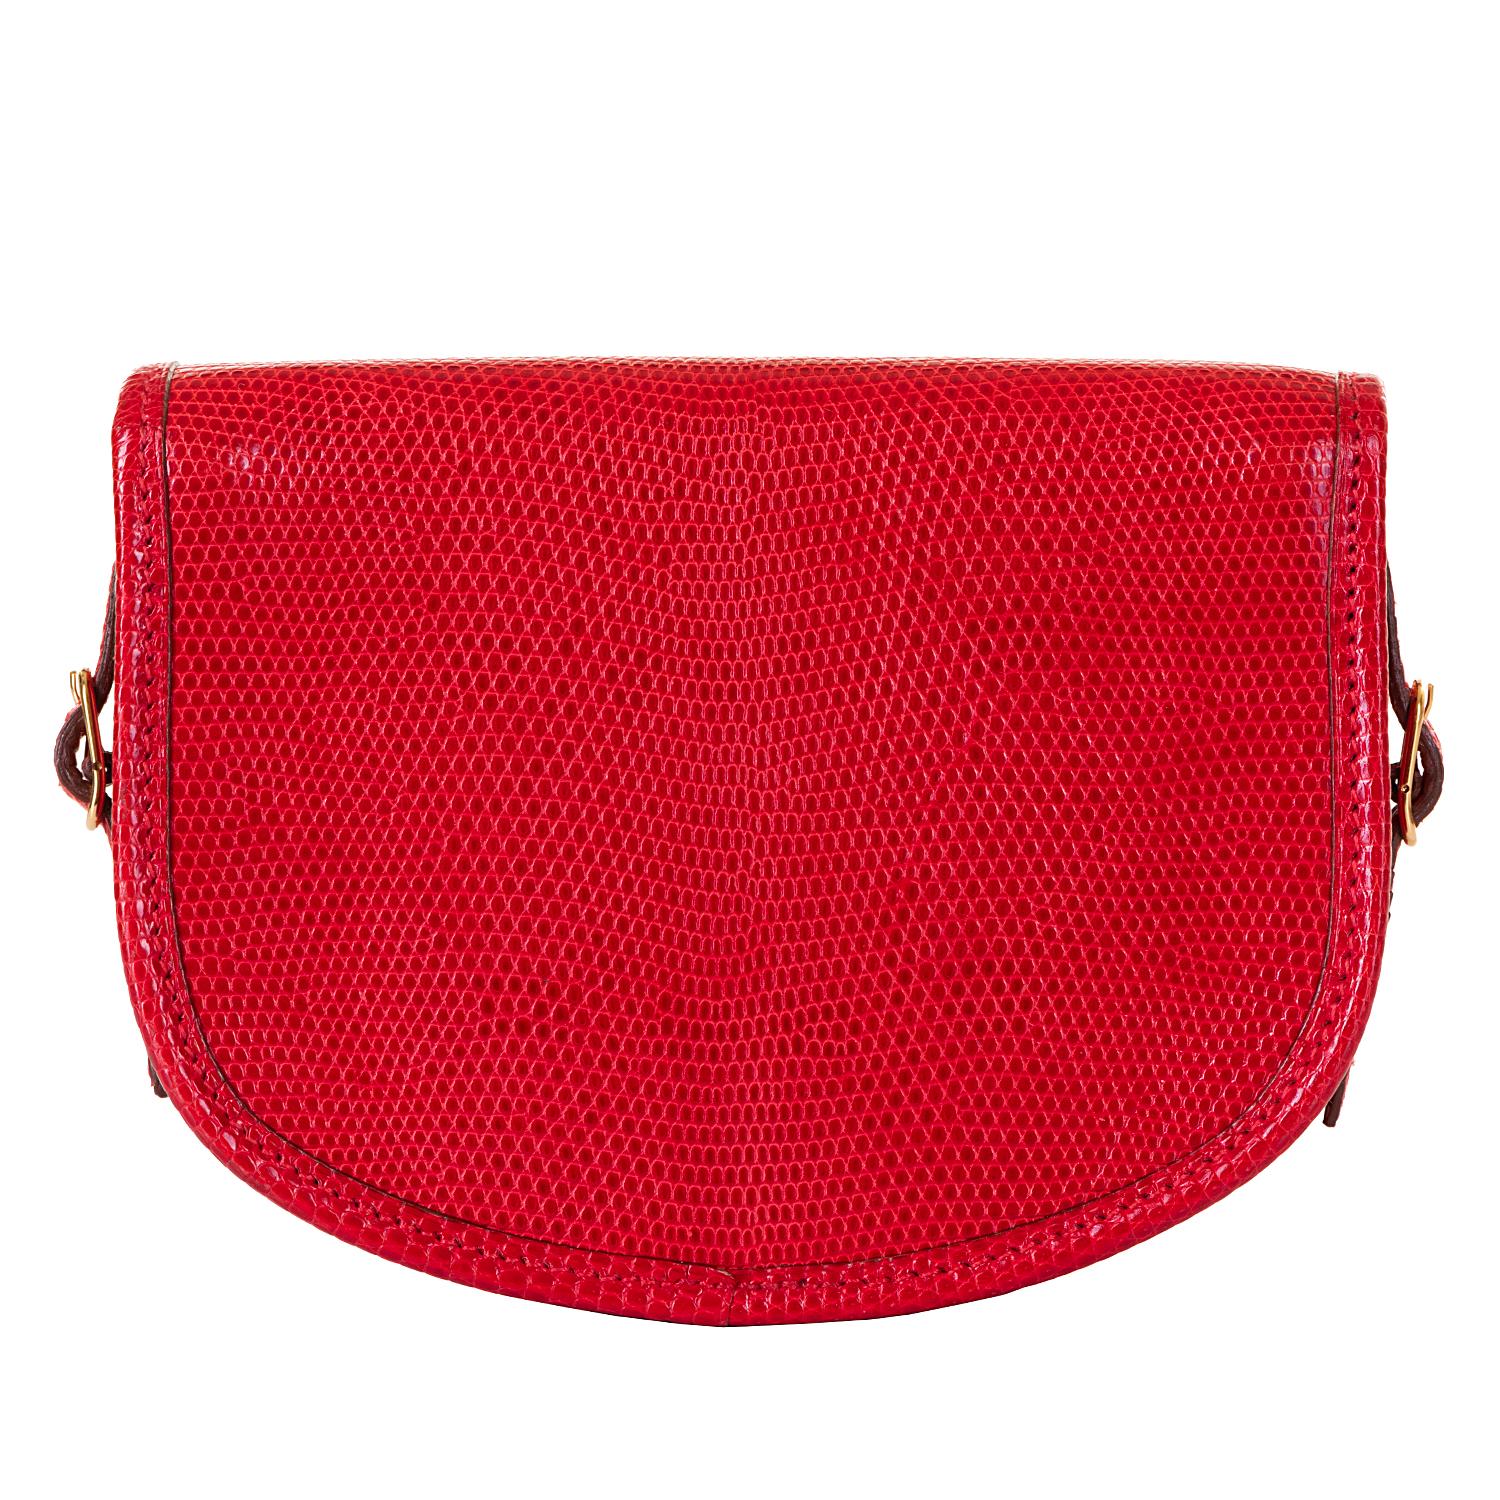 This beautiful, very rare vintage Hermes Mini evening bag, is finished in shiny red lizard, accented with gold hardware. In excellent condition throughout, this 'Tres-Chic bag can be worn as a clutch (as shown in the main image), or as a shoulder or